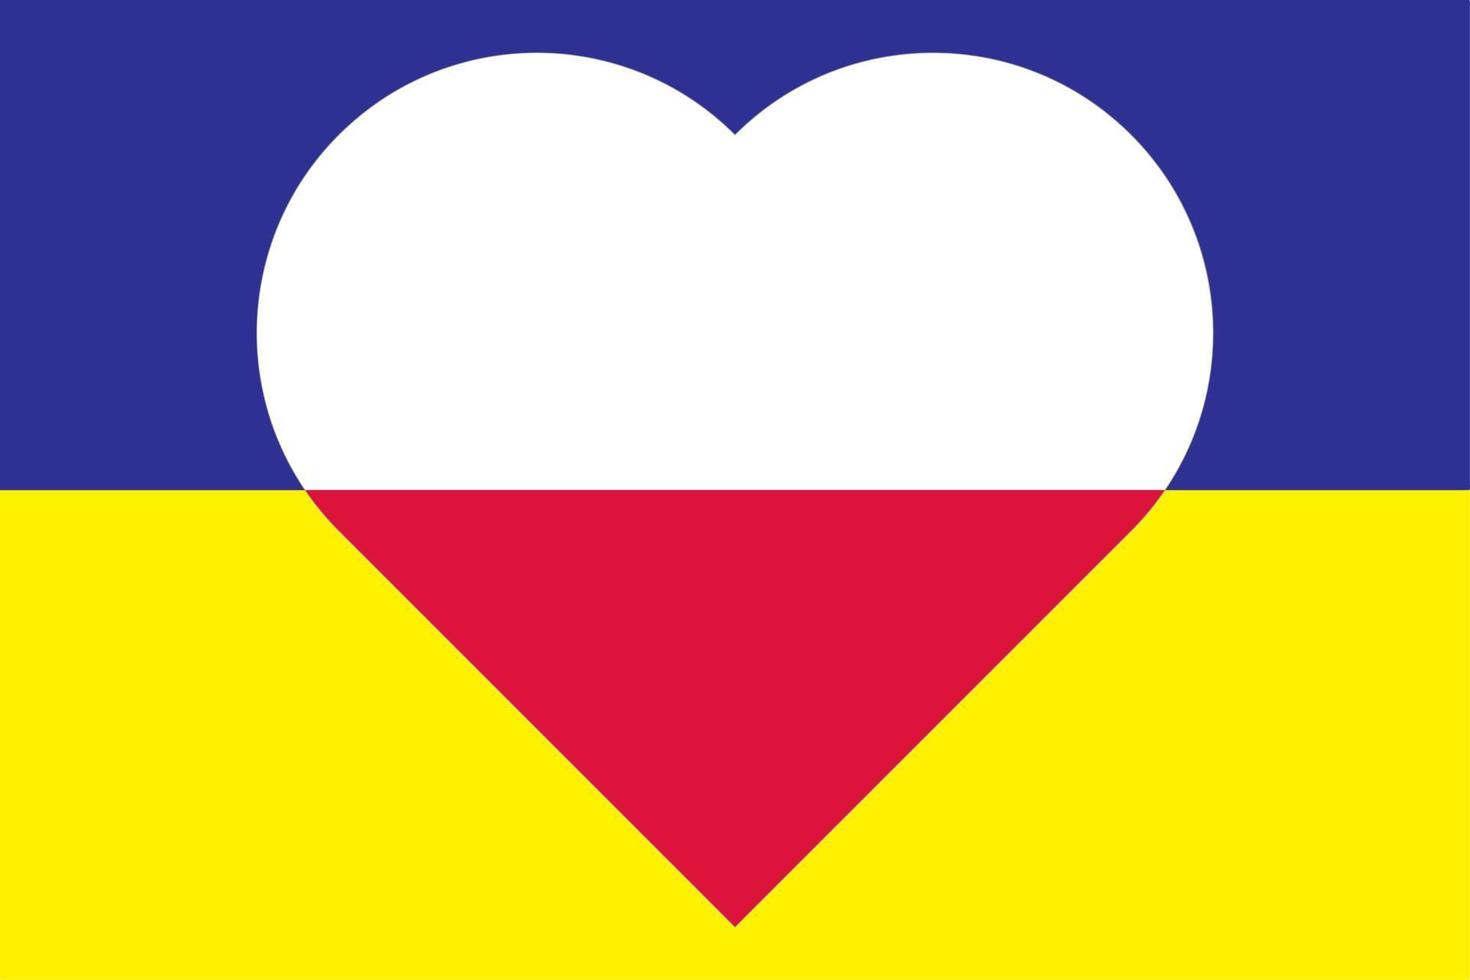 Heart painted in the colors of the flag of Poland on the flag of Ukraine. Vector illustration of a heart with the national symbol of Poland on a blue-yellow background.